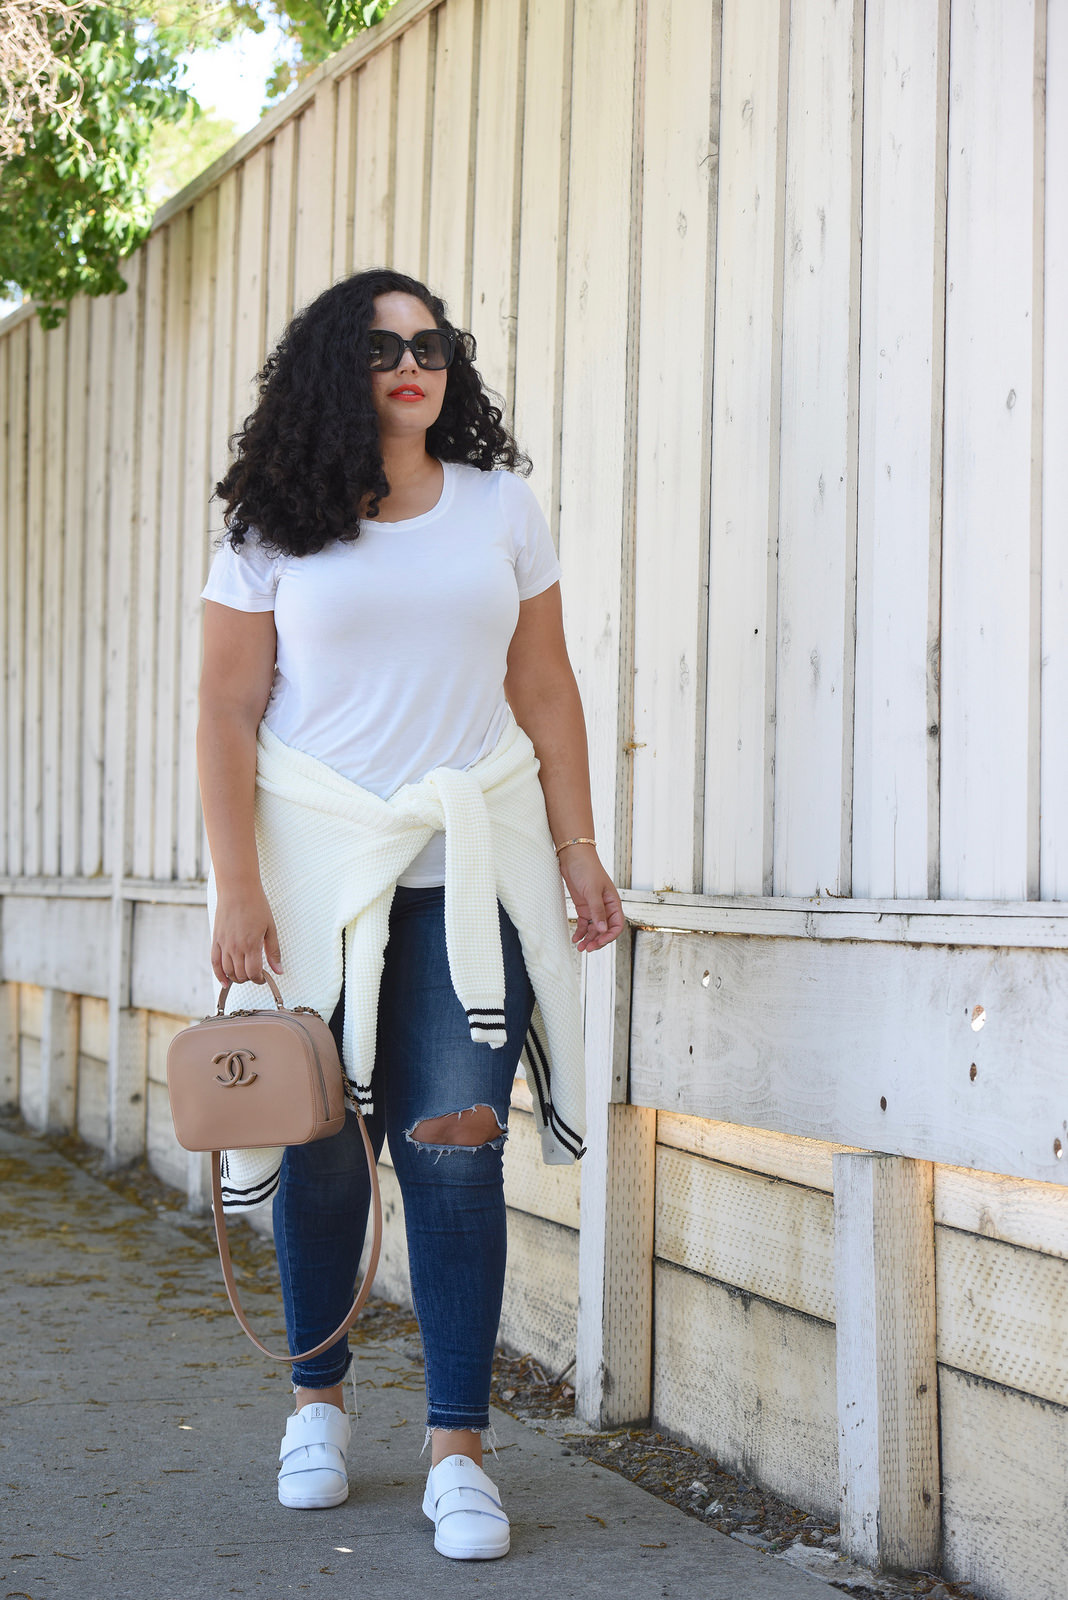 Tanesha Awasthi, also known as Girl With Curves, wearing a preppy cardigan, jeans, white sneakers and Chanel bag.